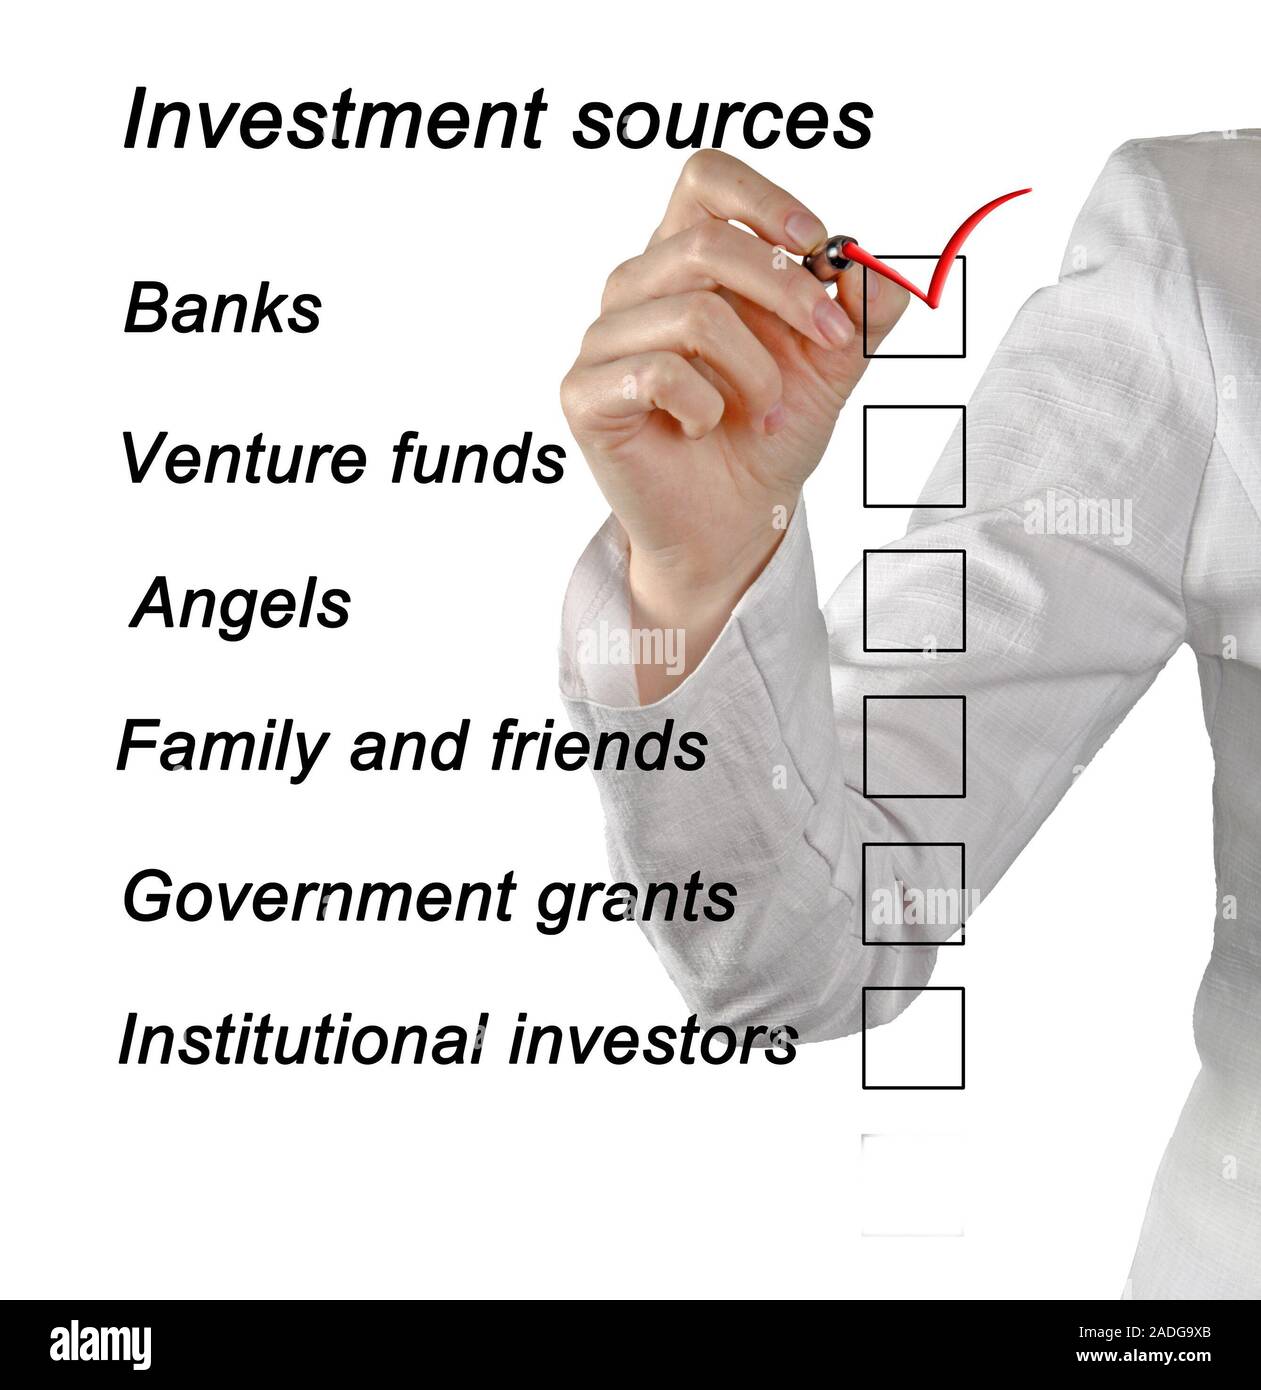 Investment sources checklist Stock Photo